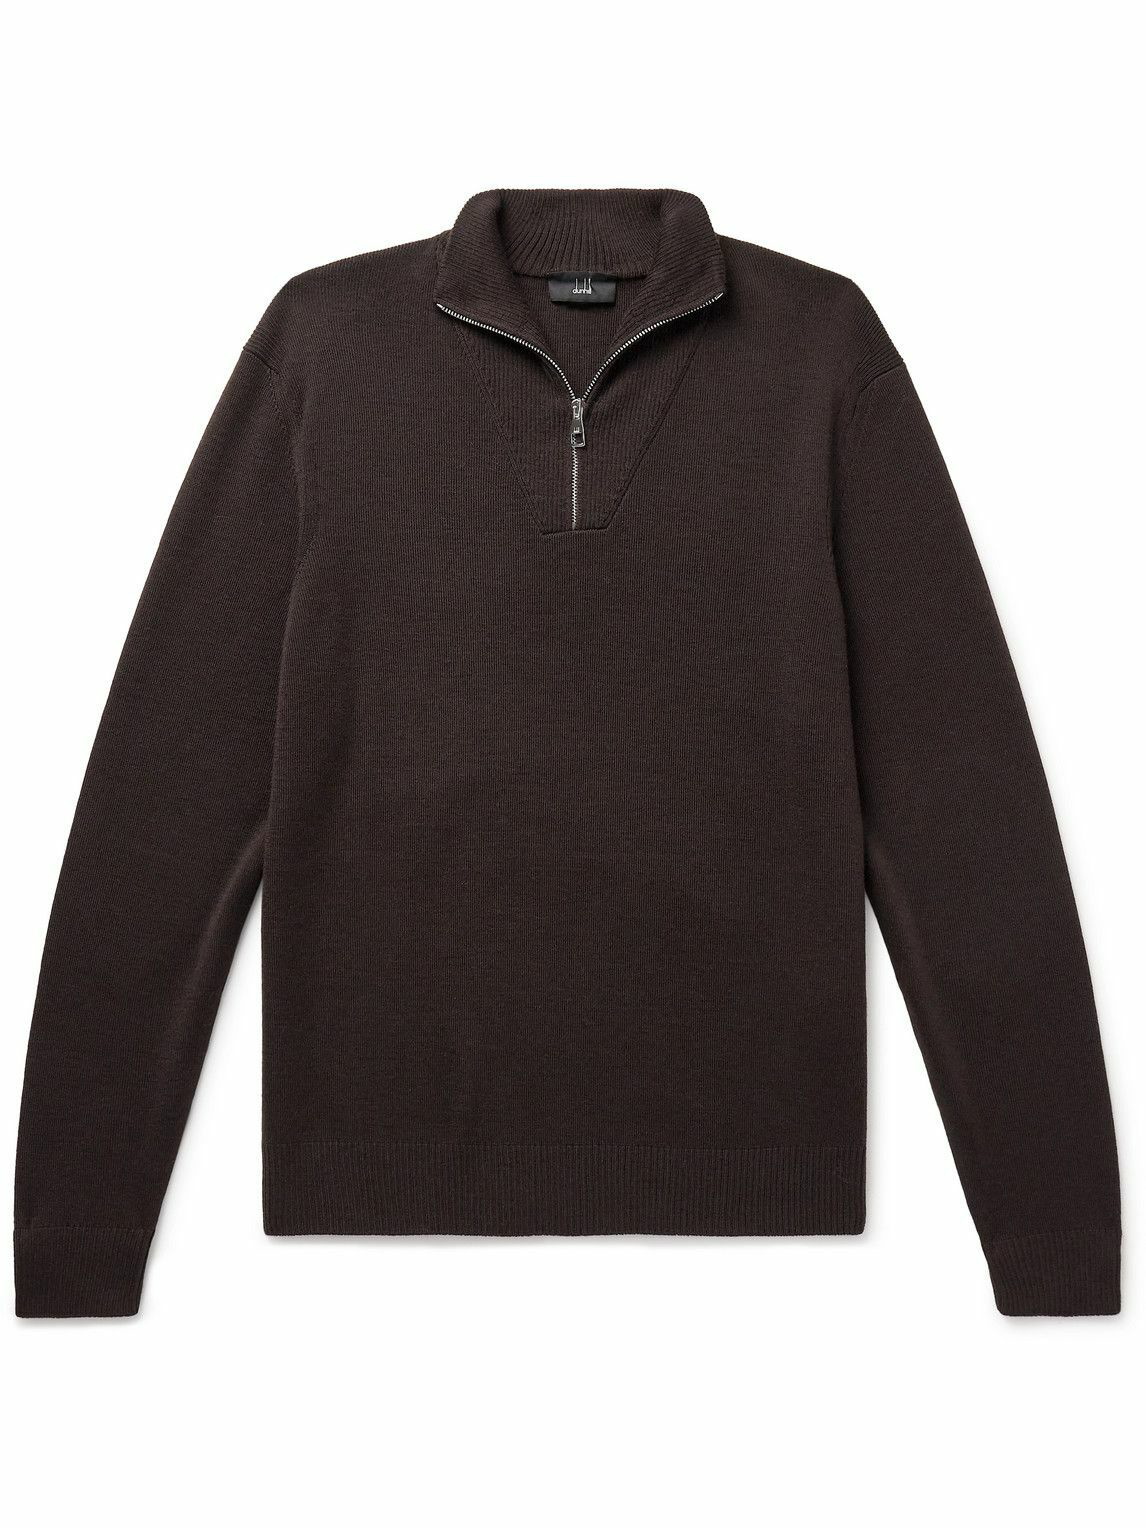 Dunhill - Slim-Fit Suede-Trimmed Wool Half-Zip Sweater - Brown Dunhill